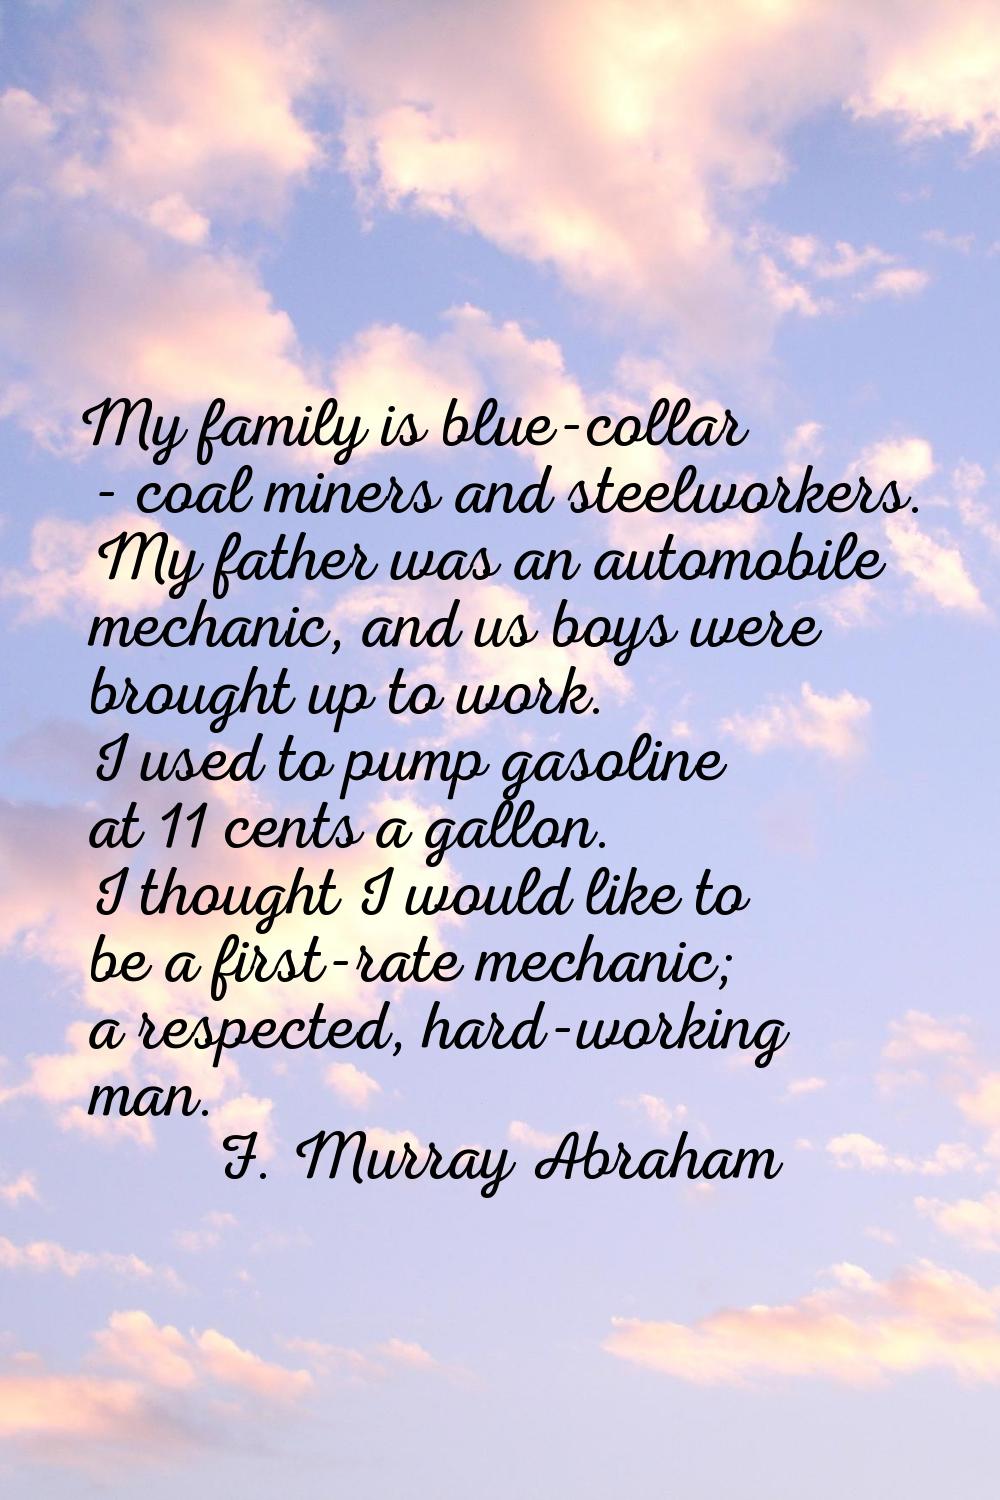 My family is blue-collar - coal miners and steelworkers. My father was an automobile mechanic, and 